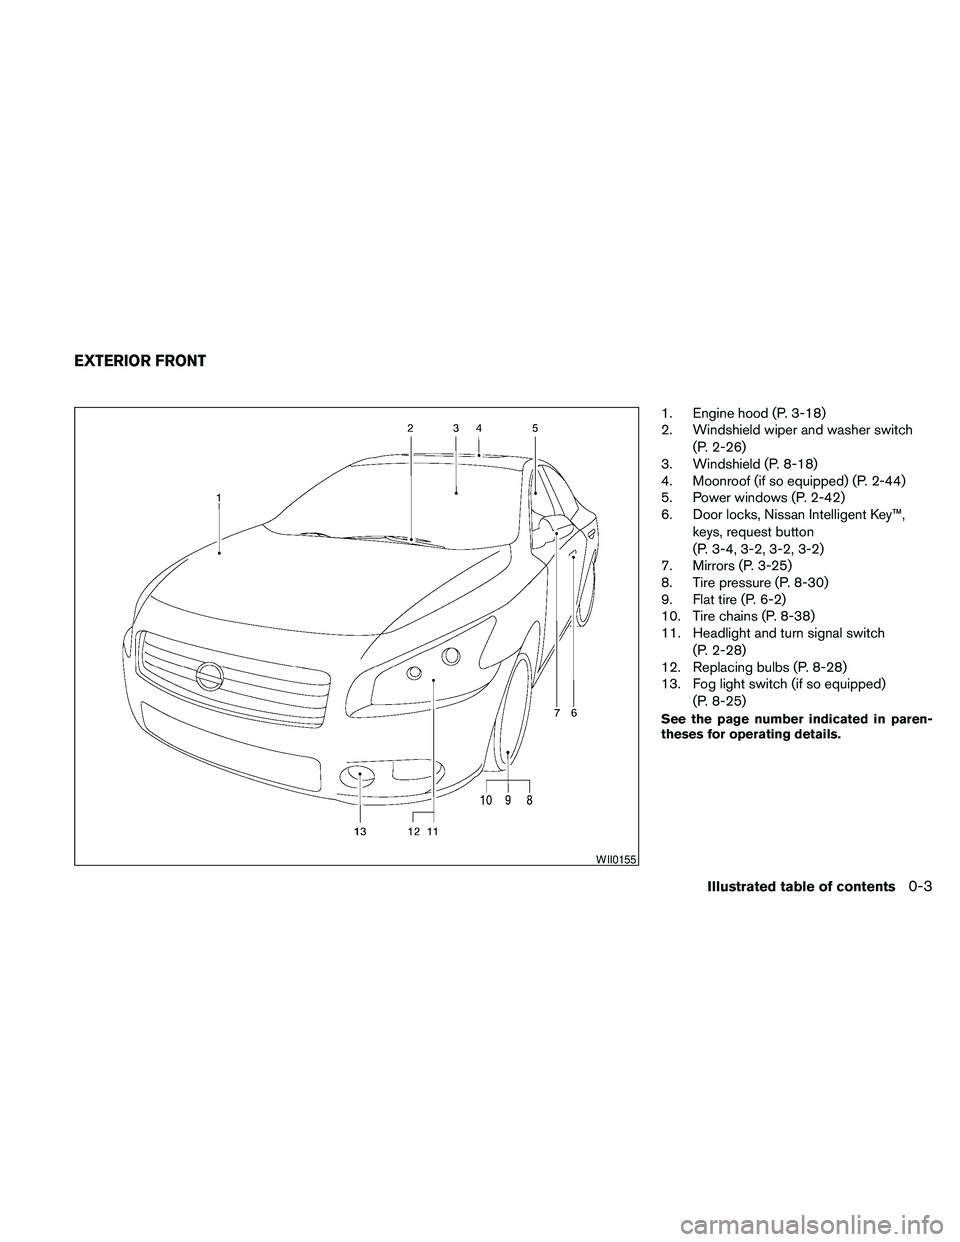 NISSAN MAXIMA 2010  Owner´s Manual 1. Engine hood (P. 3-18)
2. Windshield wiper and washer switch
(P. 2-26)
3. Windshield (P. 8-18)
4. Moonroof (if so equipped) (P. 2-44)
5. Power windows (P. 2-42)
6. Door locks, Nissan Intelligent Key